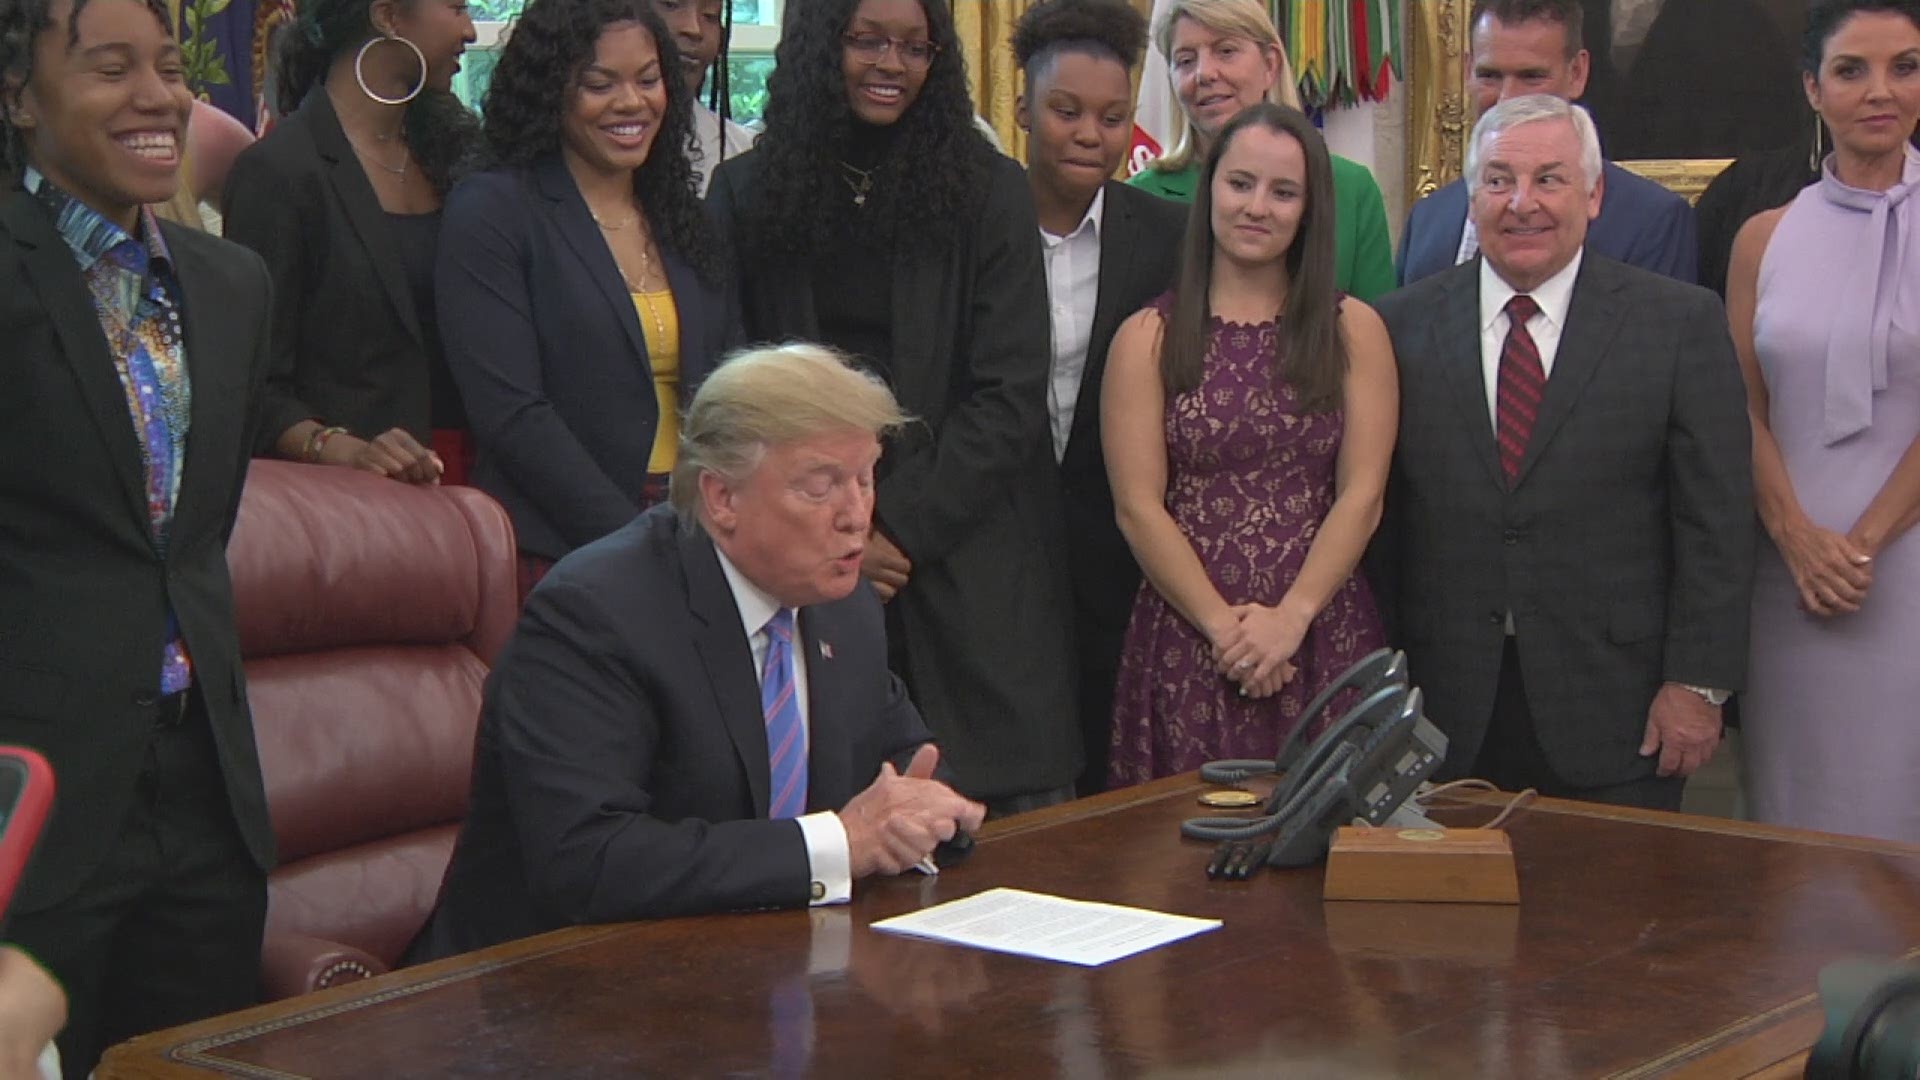 President Donald Trump praised Kim Mulkey and Chloe Jackson as he addressed the Lady Bears in the Oval Office.